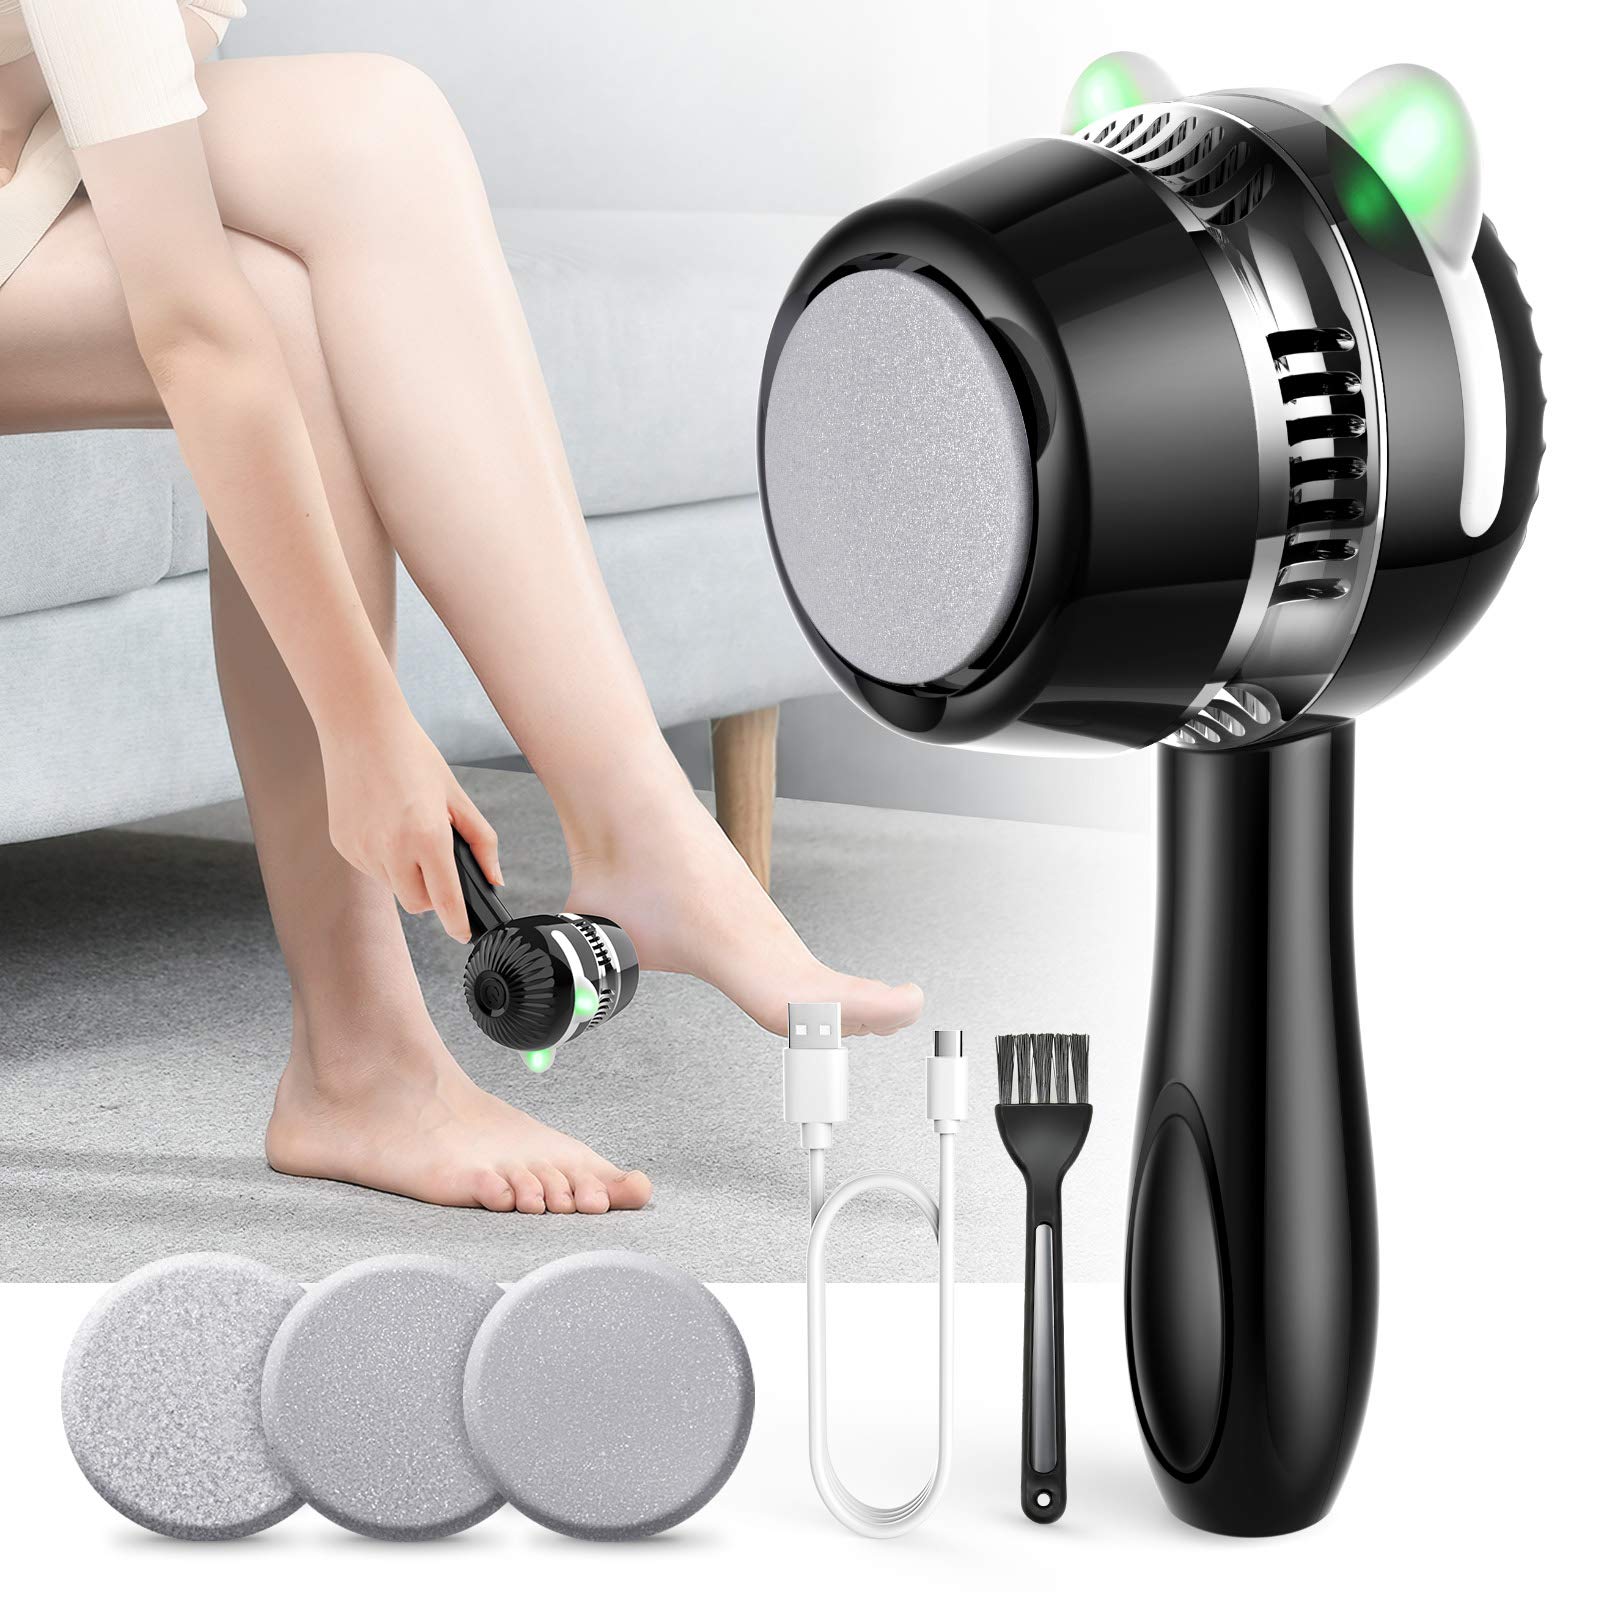 AIFREE beauty equipment vacuum rechargeable dead foot skin grinder and electric foot callus remover - T4x Quadruple Love